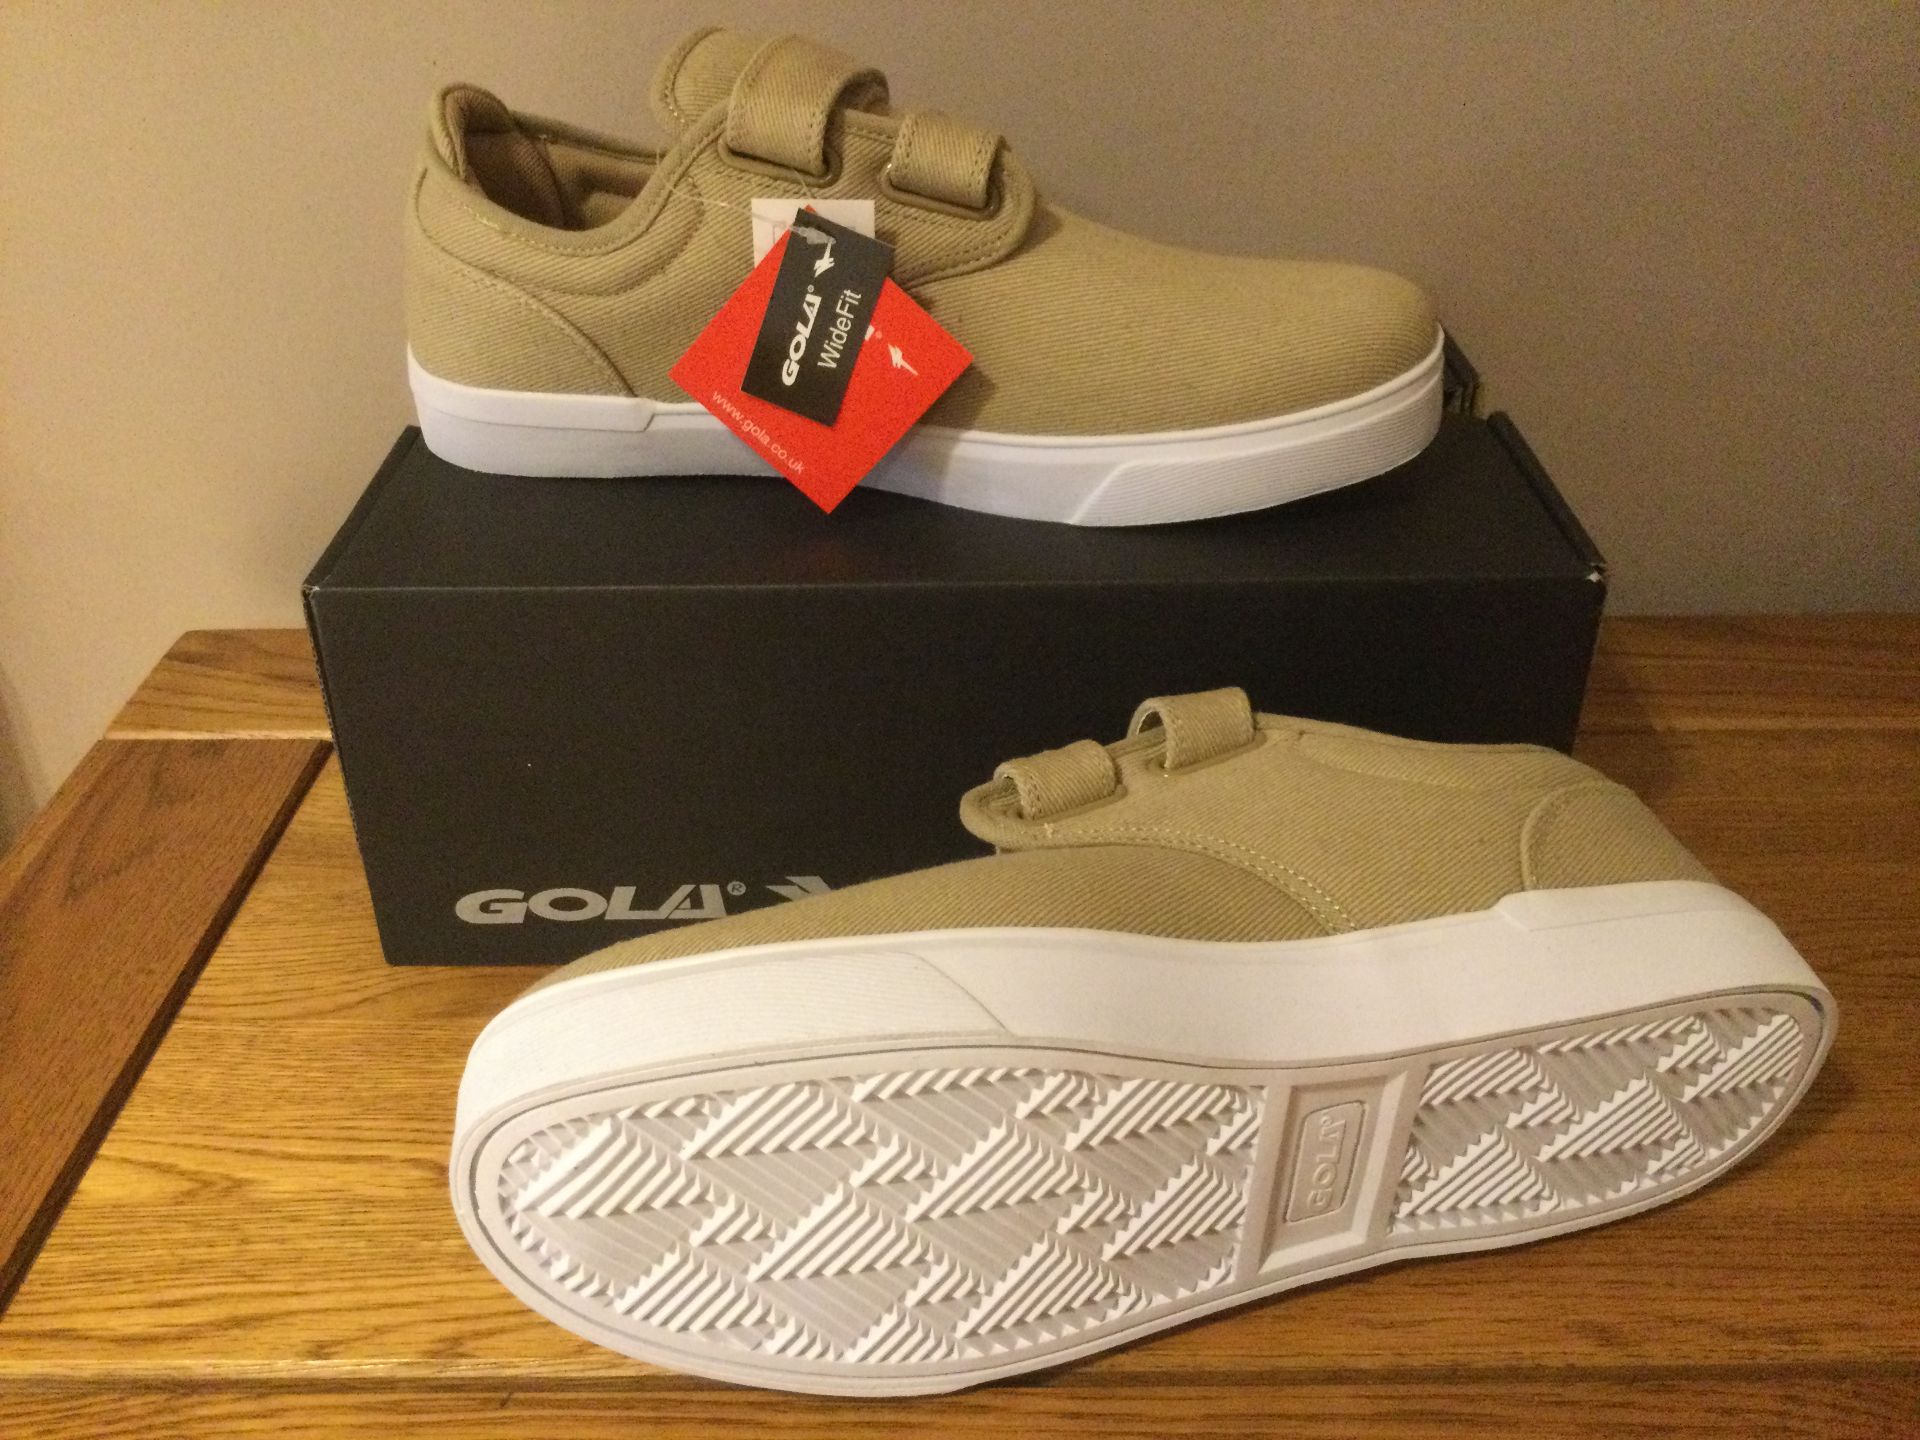 Gola “Panama” QF Men's Wide Fit Trainers, Size 10, Taupe/White - New RRP £36.00 - Bild 4 aus 5